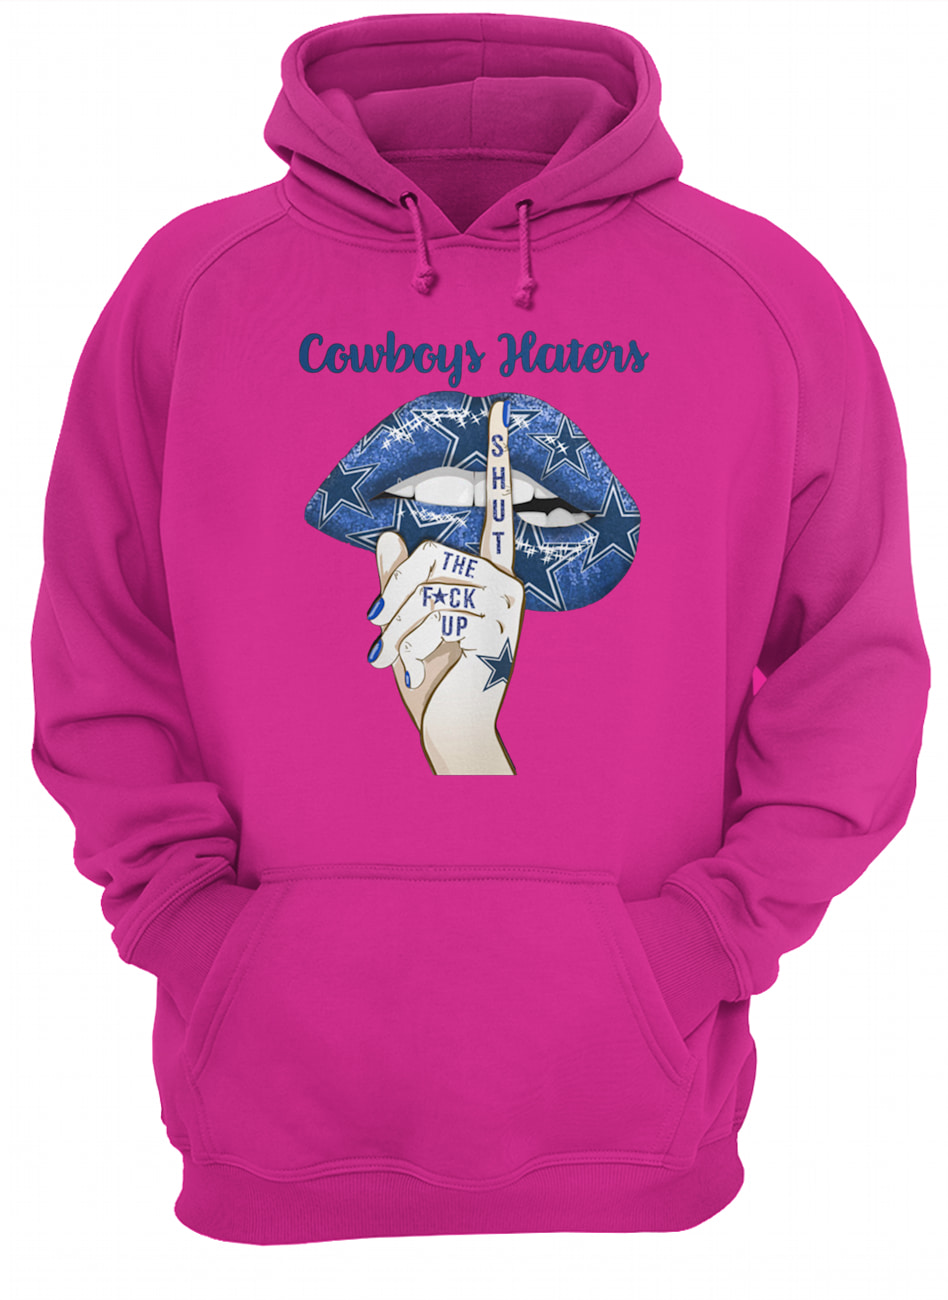 Dallas cowboys lips cowboys haters shut the fuck up hoodie